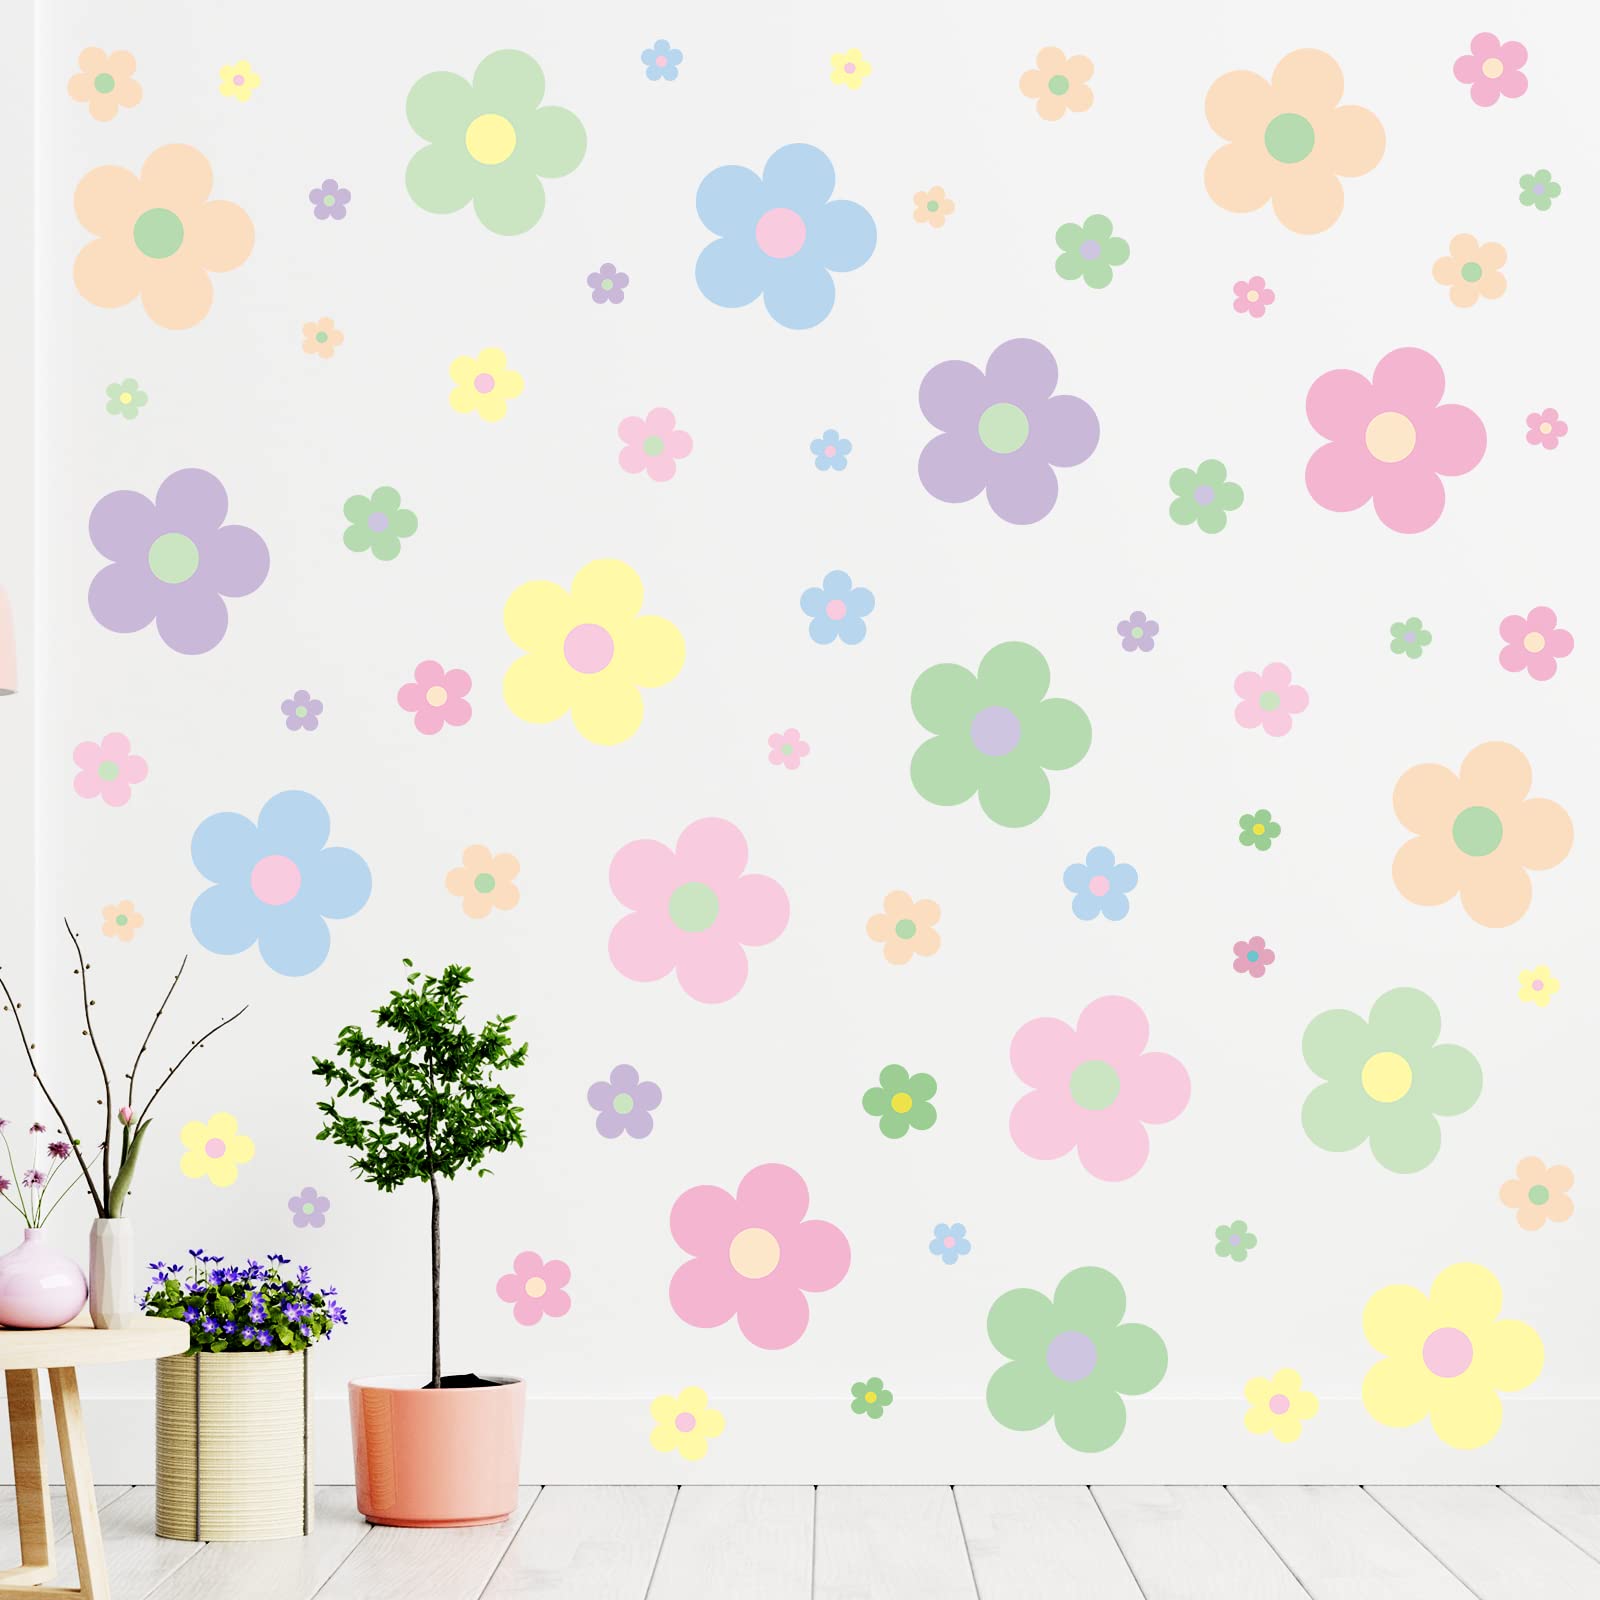 Ho Pcs Y2K Room Decor Cute Flowers Wall Decal Aesthetic Preppy Wall Art Decor Peel and Stick Retro Stickers Room Aesthetic Decor for Girl Teen Home Dorm Bedroom Decoration Danish